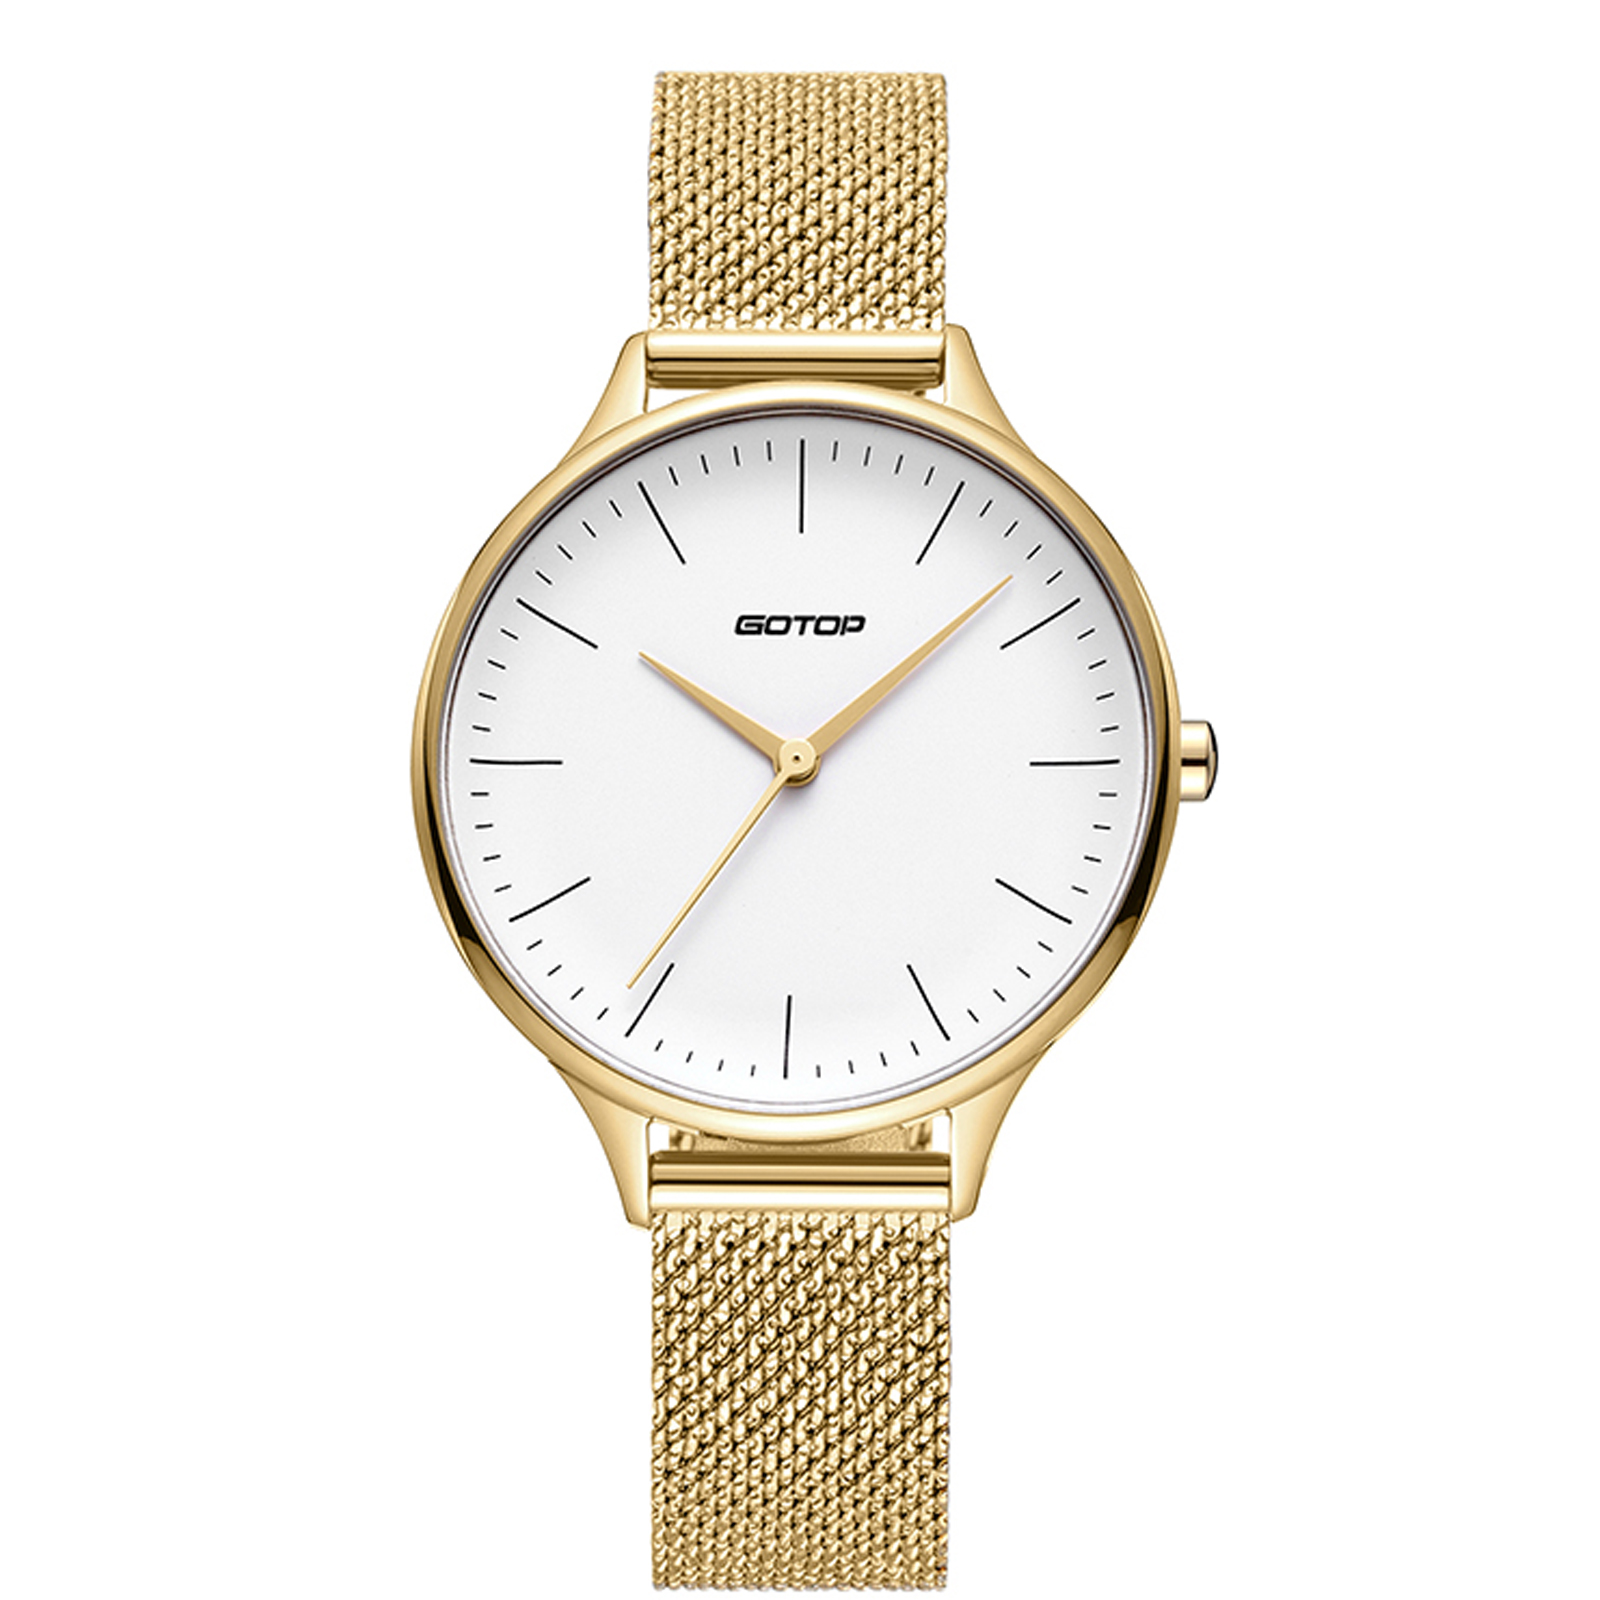 Gold And White Women's Watch With Mesh Band